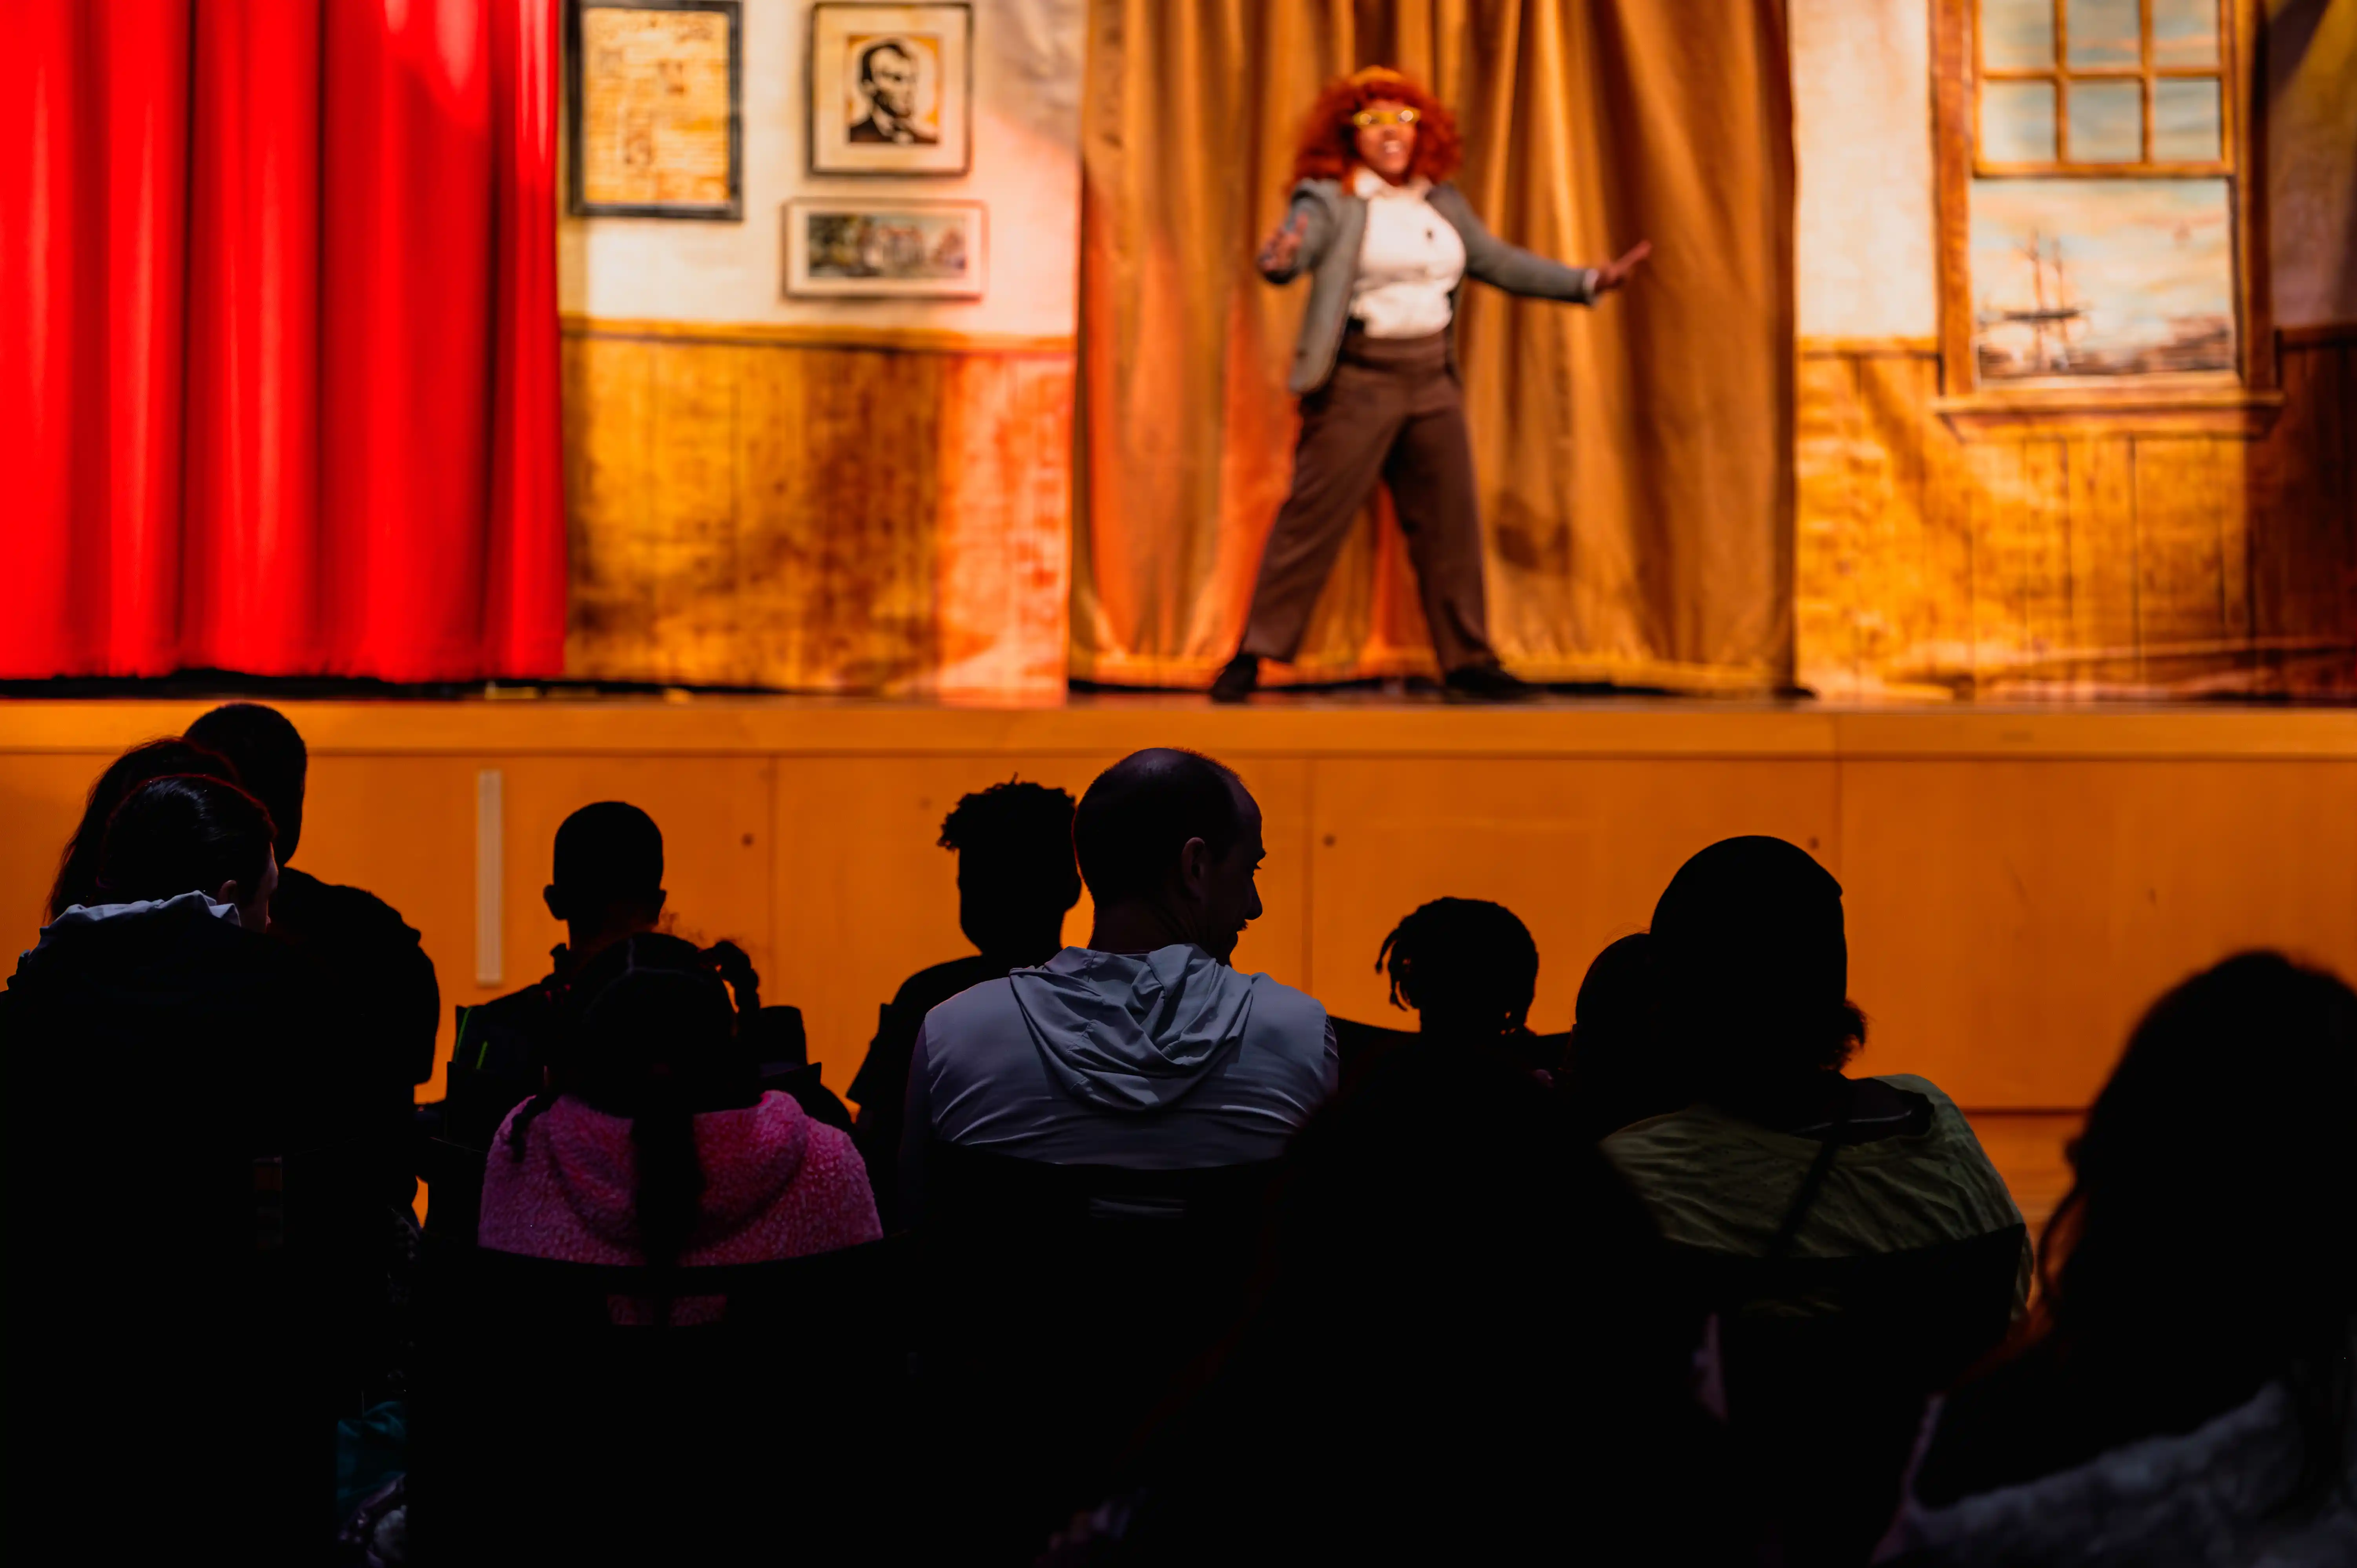 Audience watching a performer on stage at a theater production.